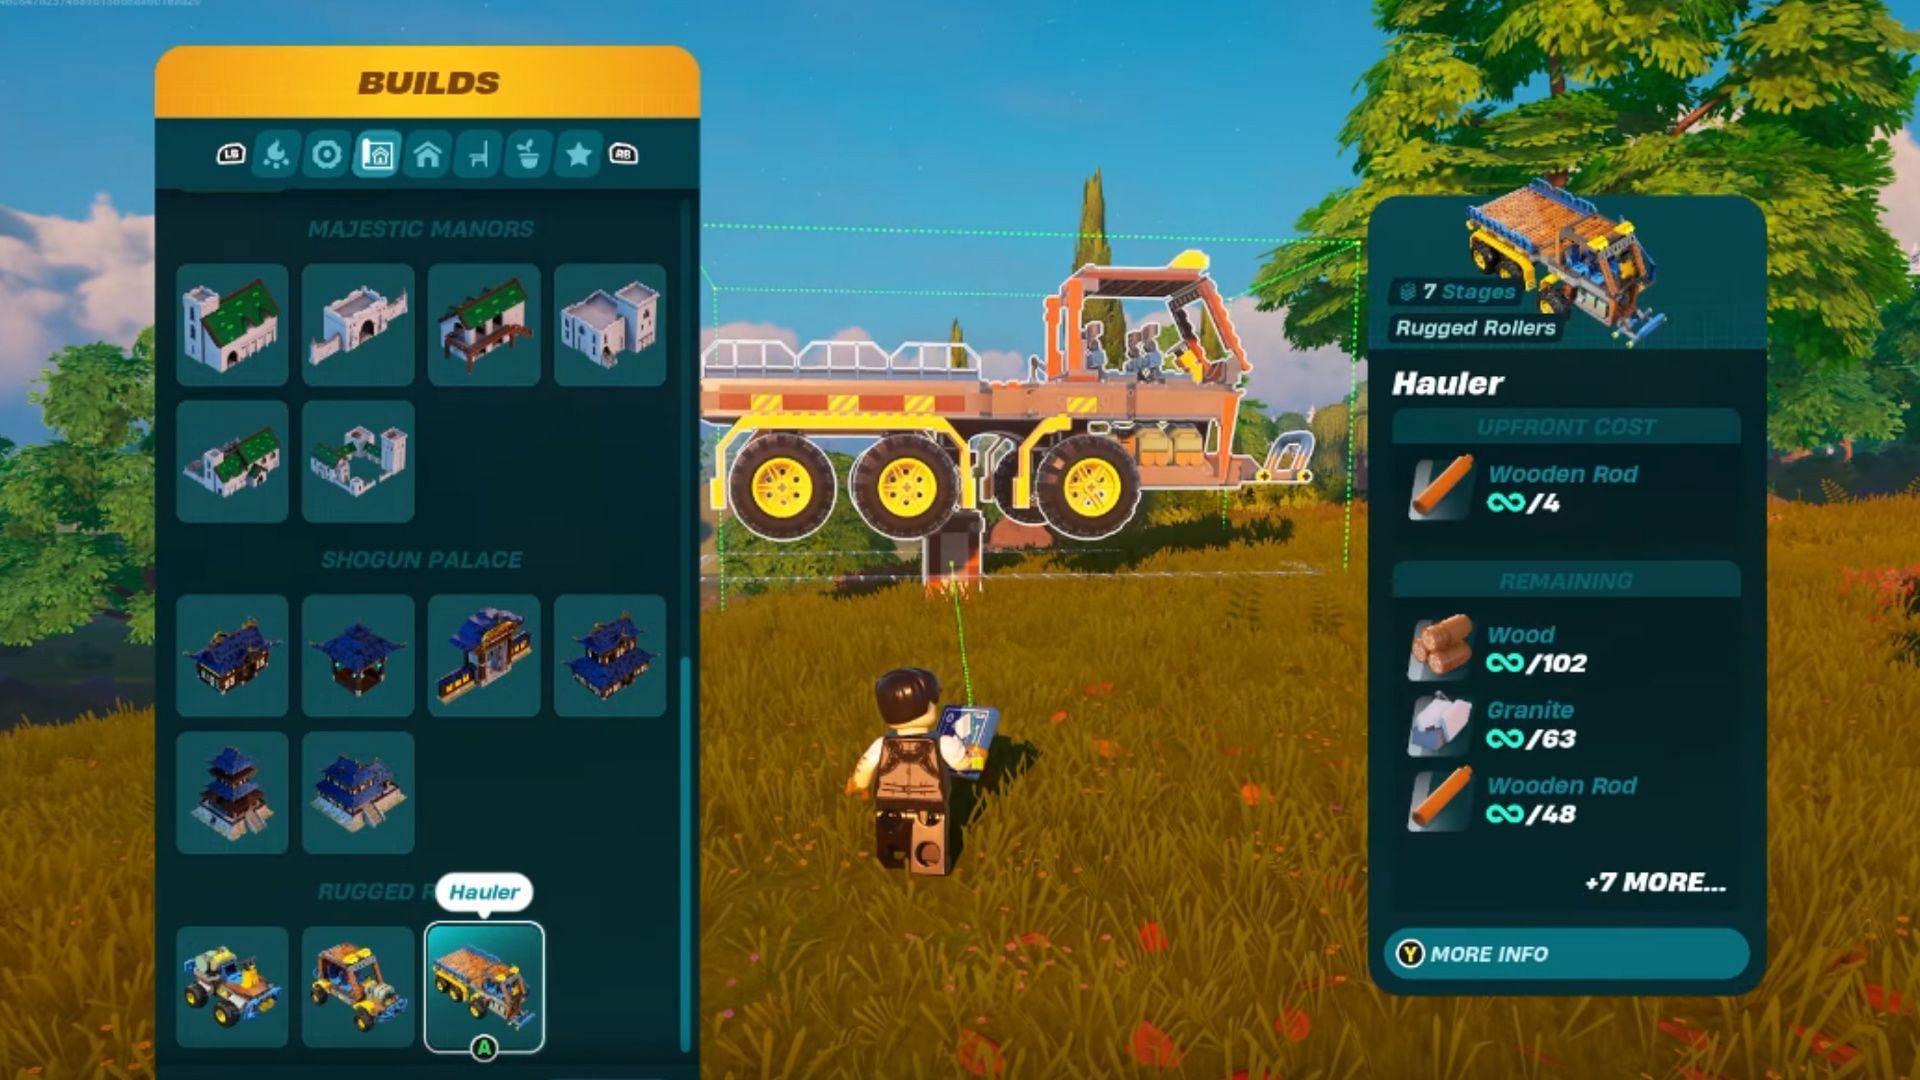 You have to unlock the crafting recipe for the Hauler first (Image via YouTube/ Perfect Score)